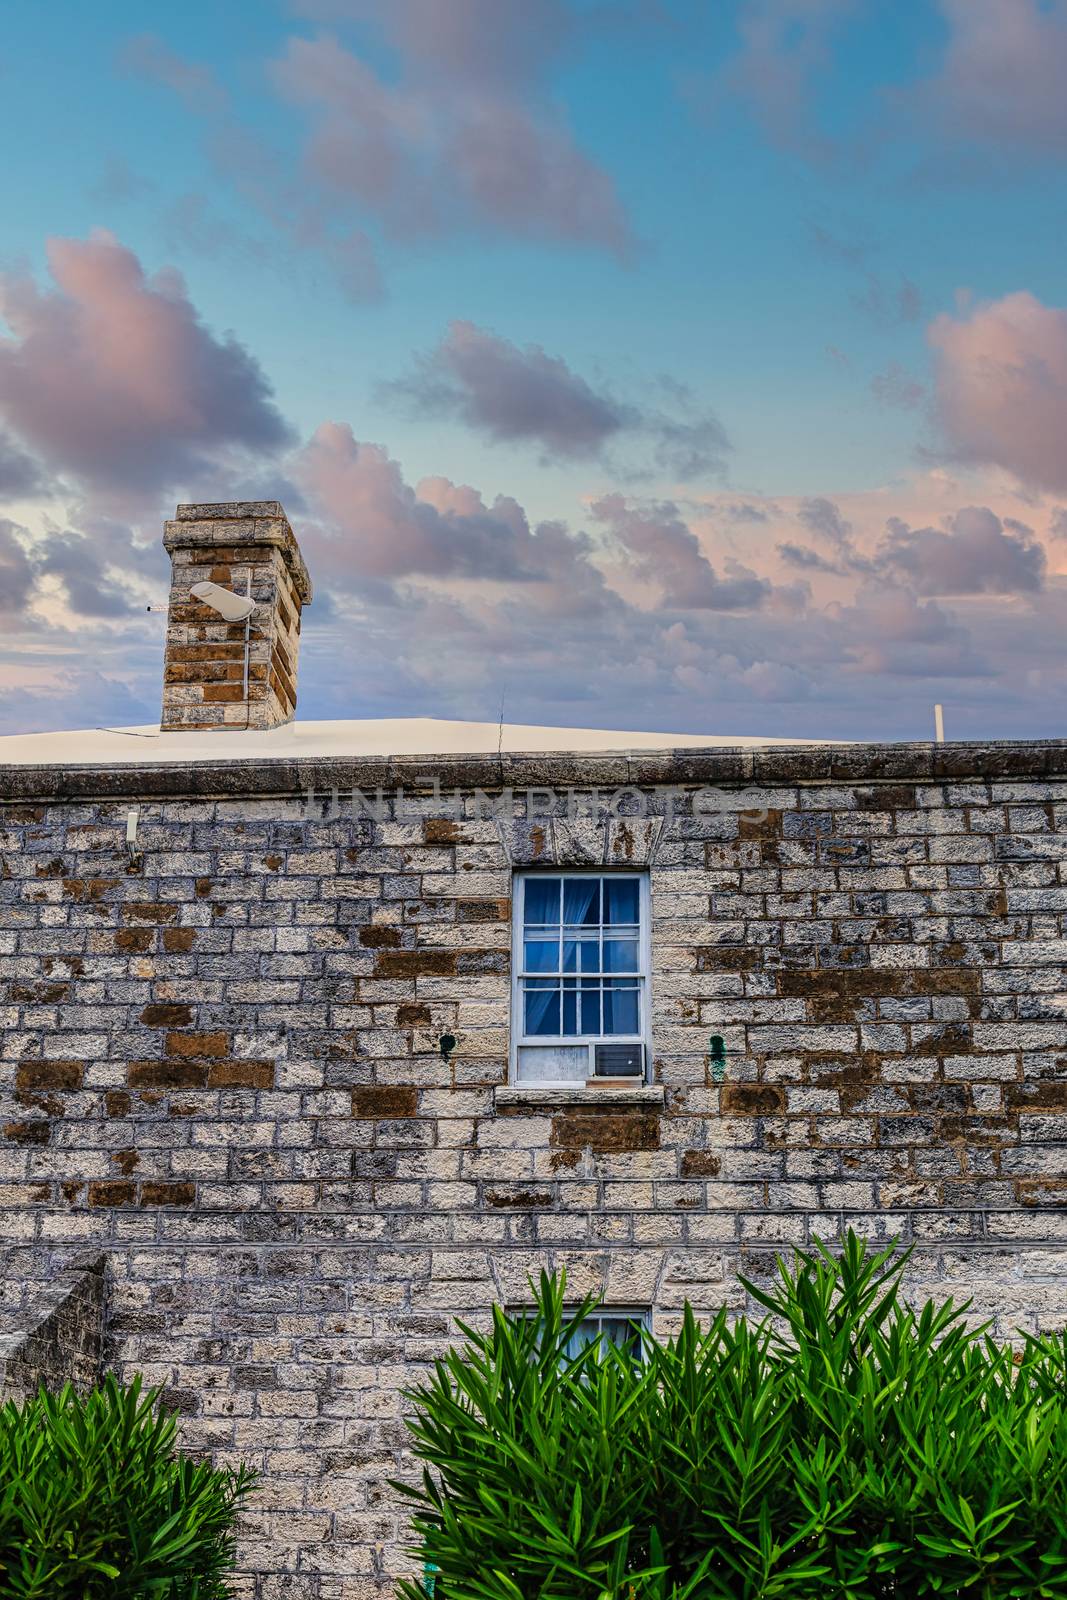 Window Air Conditioner in Old Stone Building at Dusk by dbvirago